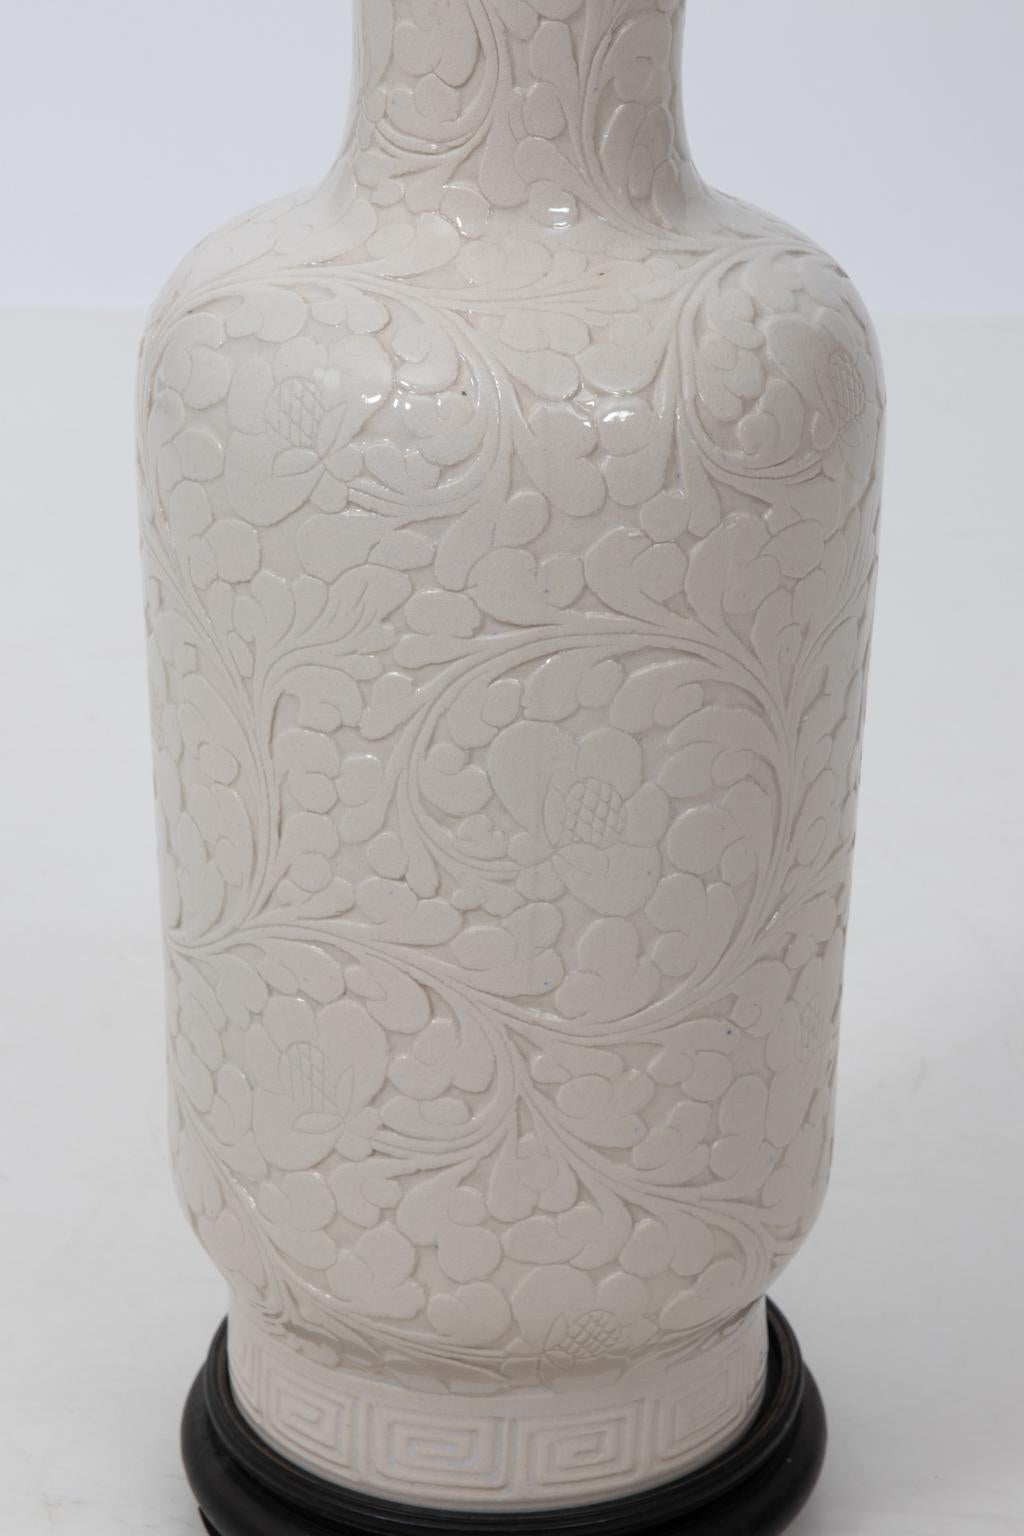 White glazed vase with foliate designs on a black wood base, circa 1970s. Please note of wear consistent with age including finish loss on the body and rim. Made in China.